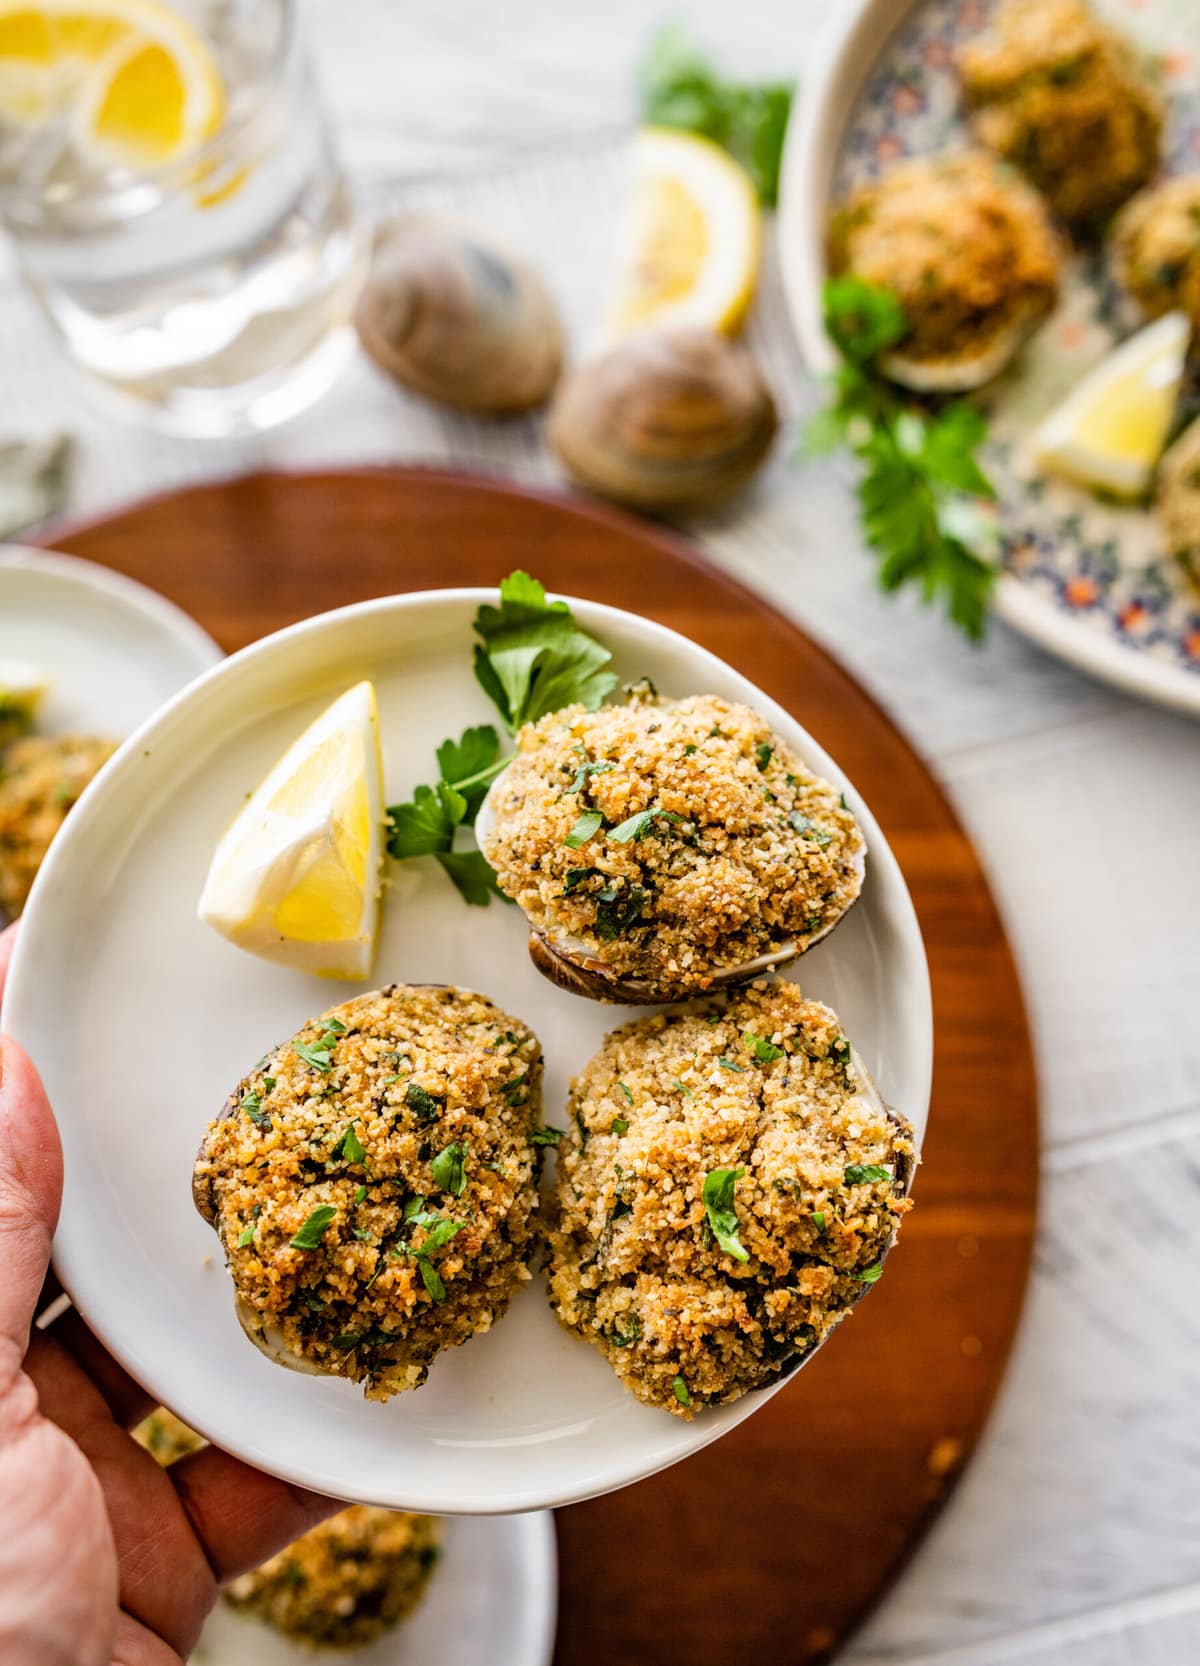 Best Italian Baked Stuffed Clams on a small plate ready to eat as an appetizer.